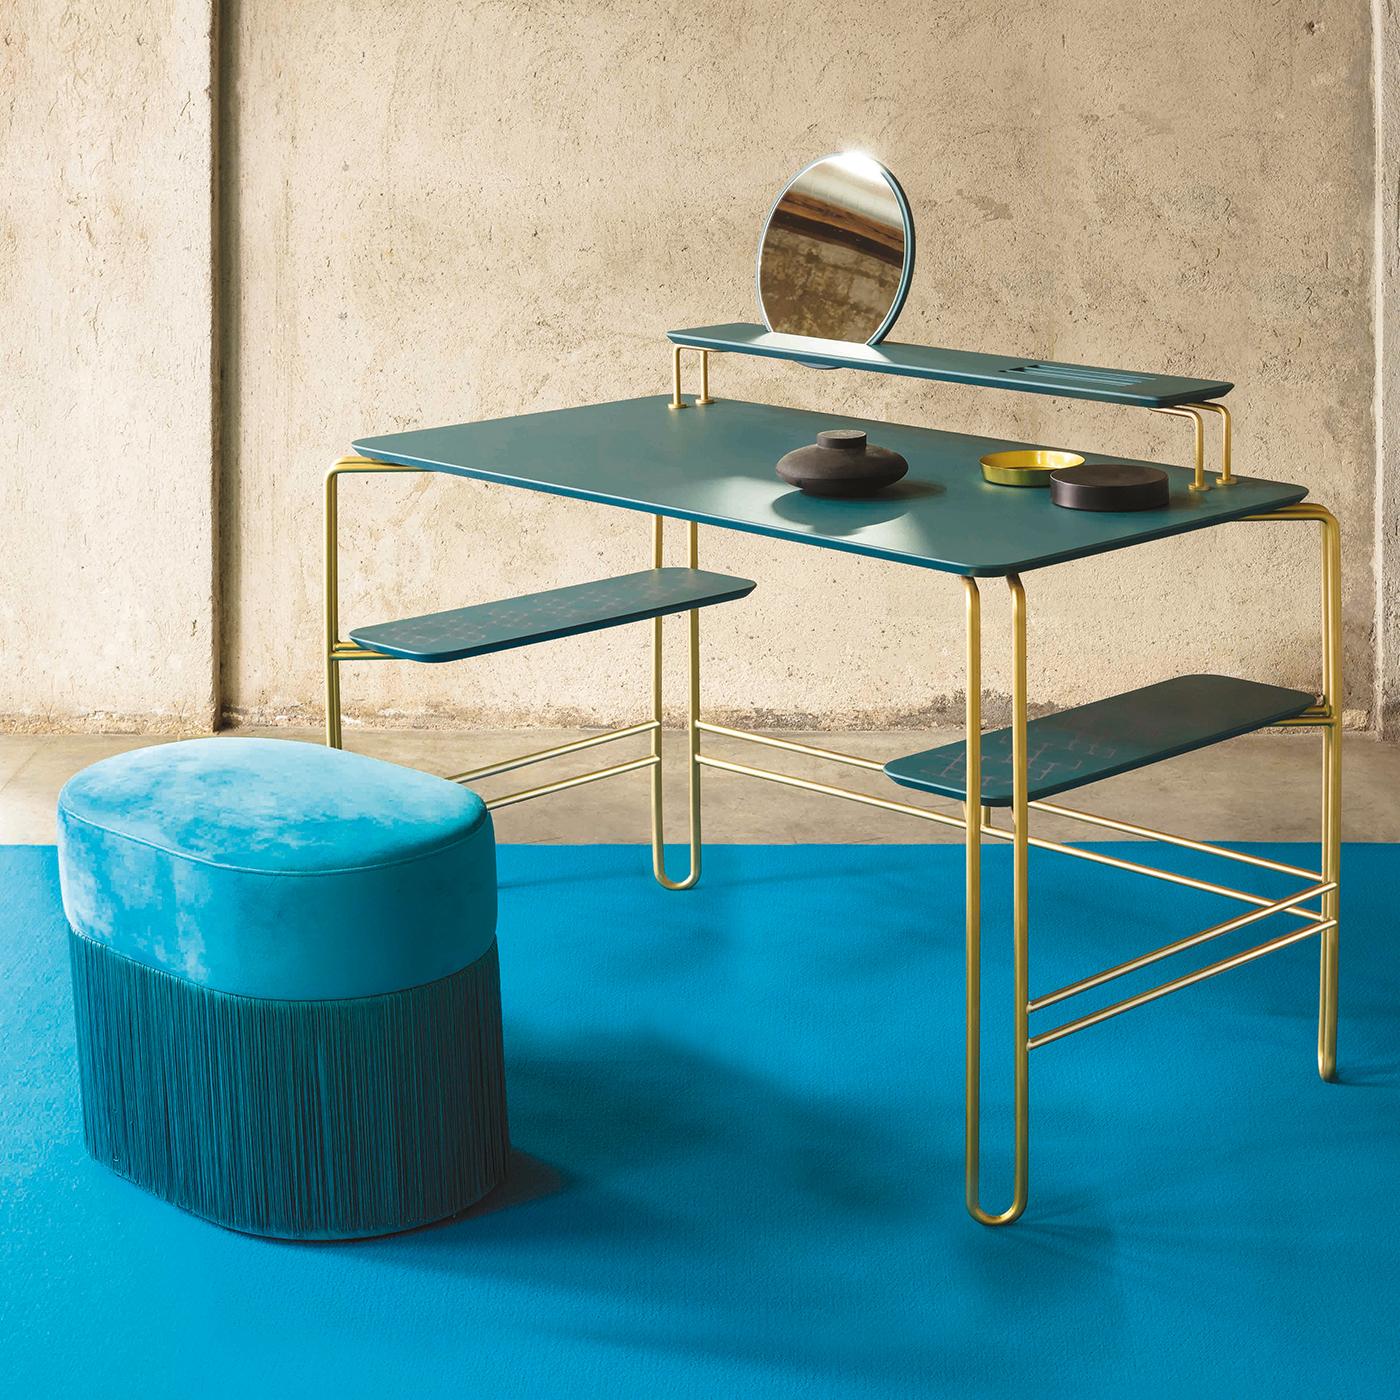 Characterized by clear, simple lines, the Grimilde console desk can be used as a workspace or a Minimalist vanity. On a light metal base with a power coating, the desk's surfaces are made in lacquered MDF, while the two lower shelves, perfect for